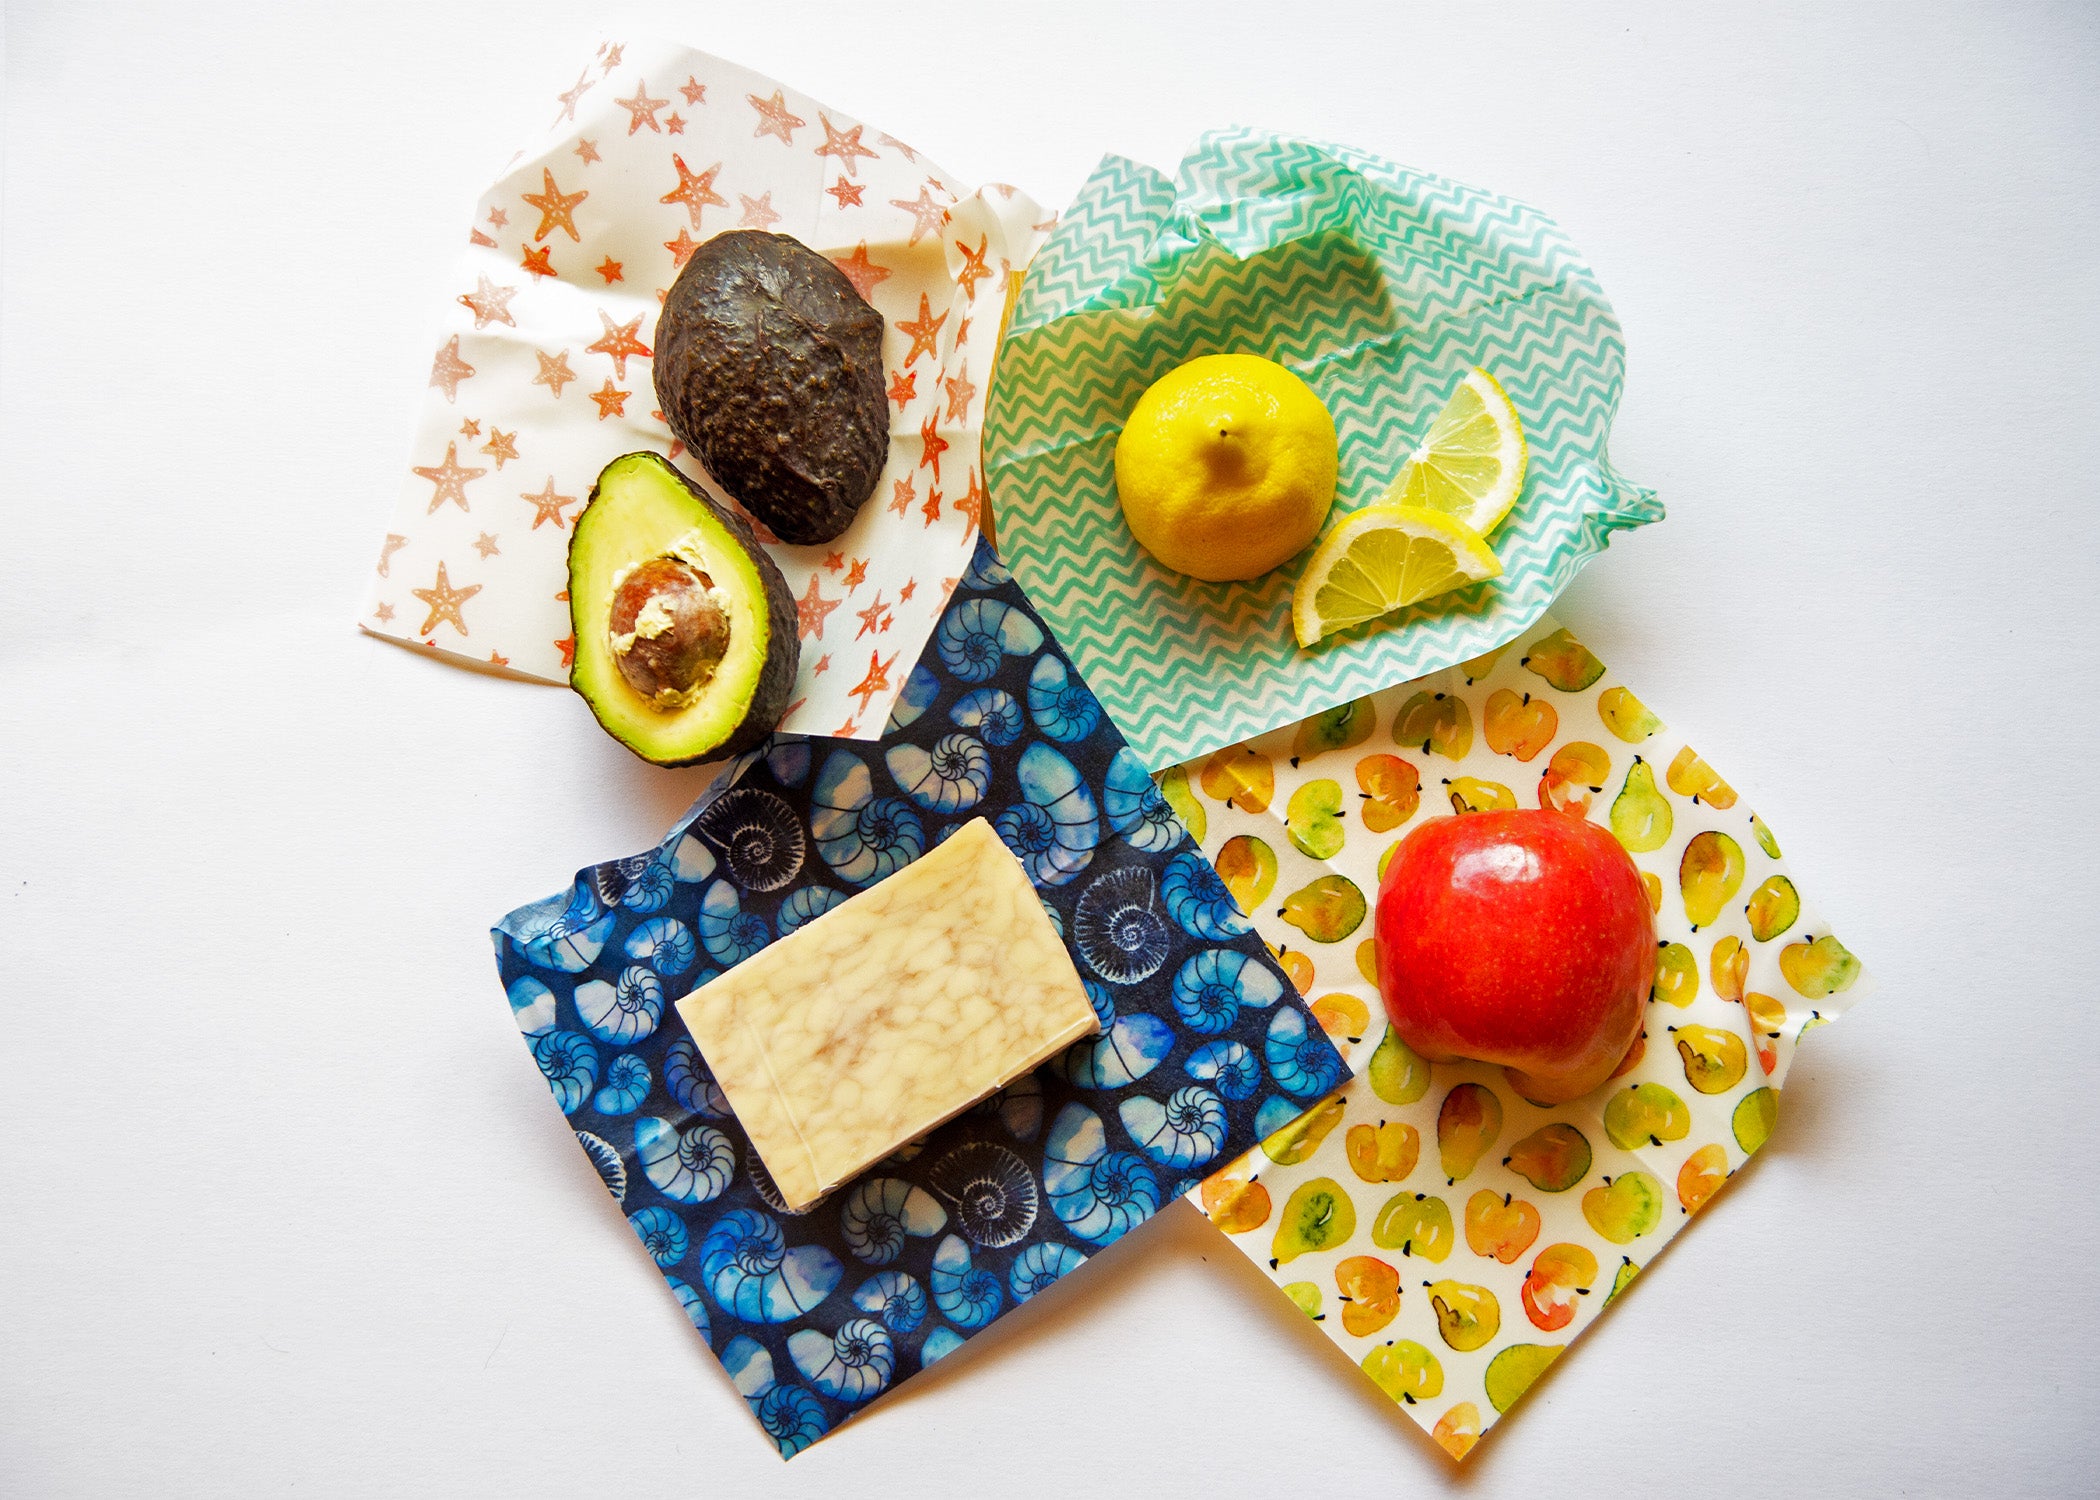 FAQ: How to Use a Beeswax Wrap